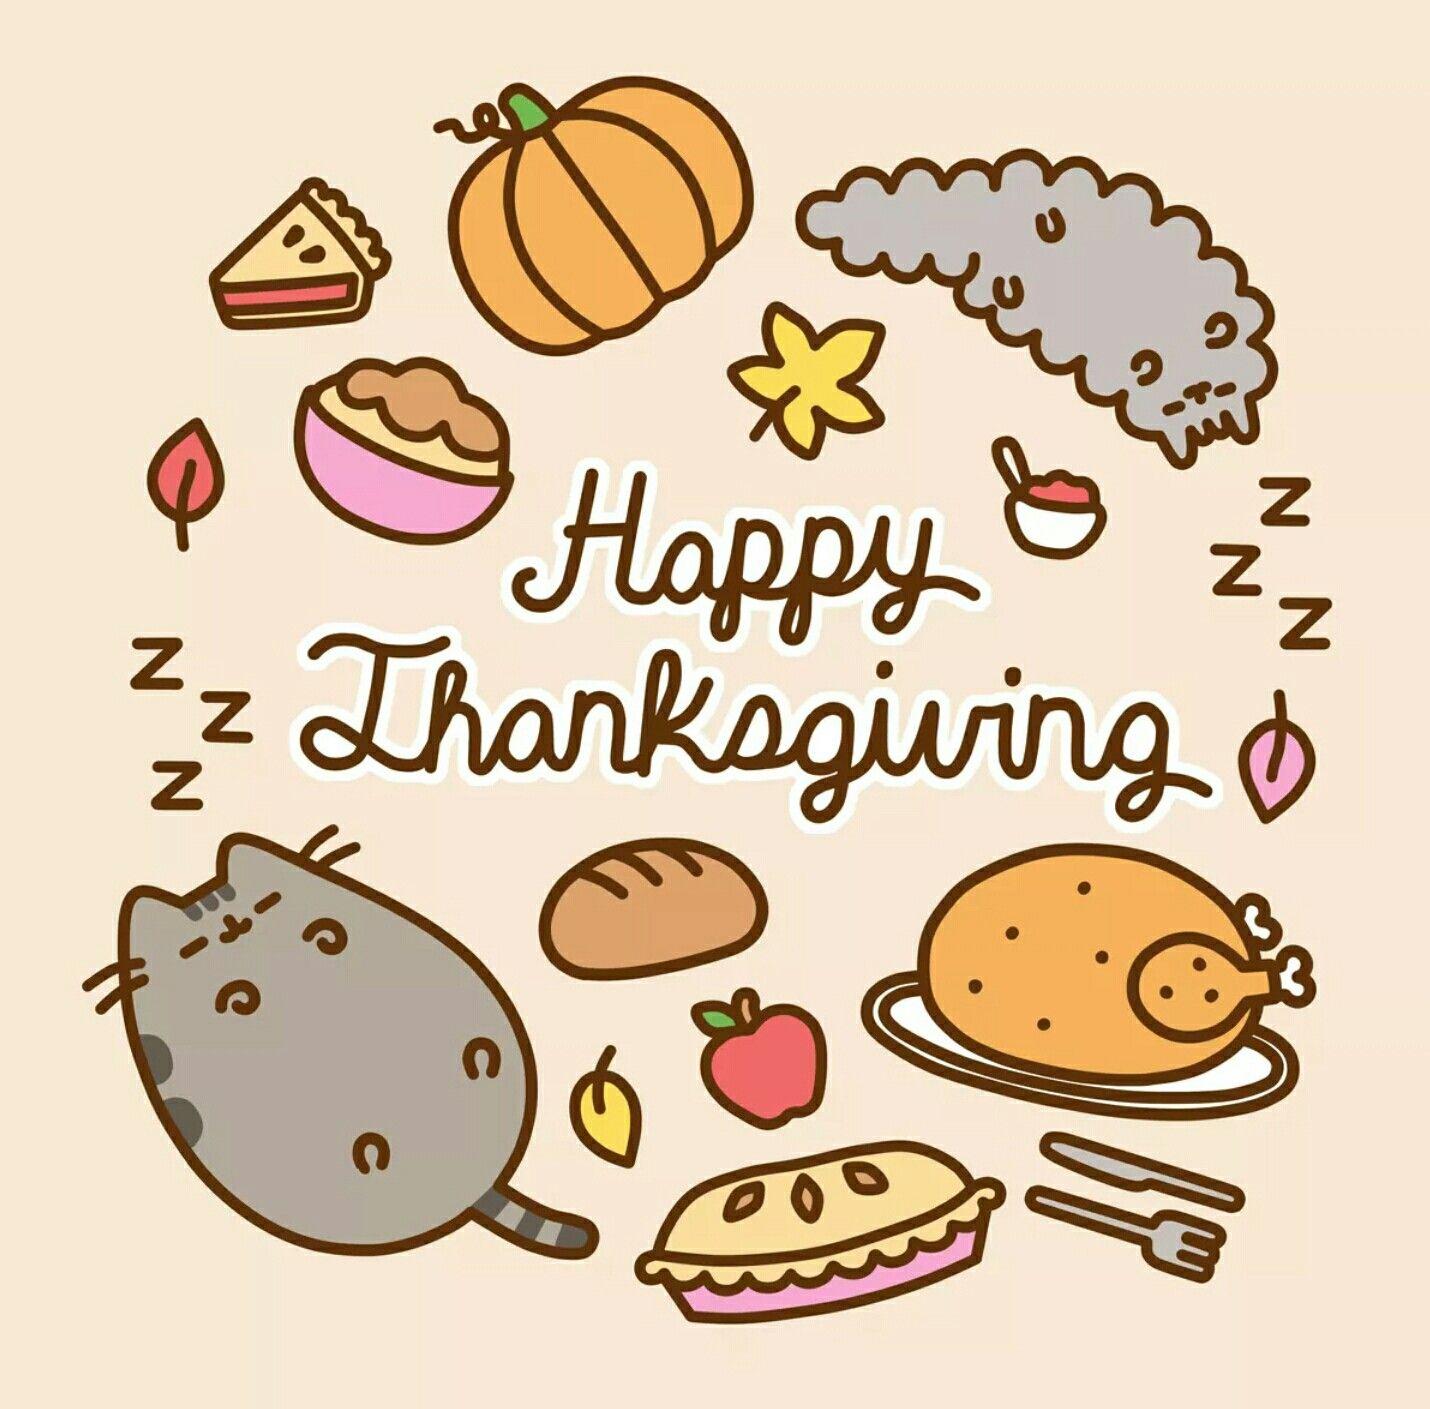 10 Cute Thanksgiving Wallpapers  Variety Pies Wallpaper for iPhone  Phone  1  Fab Mood  Wedding Colours Wedding Themes Wedding colour palettes